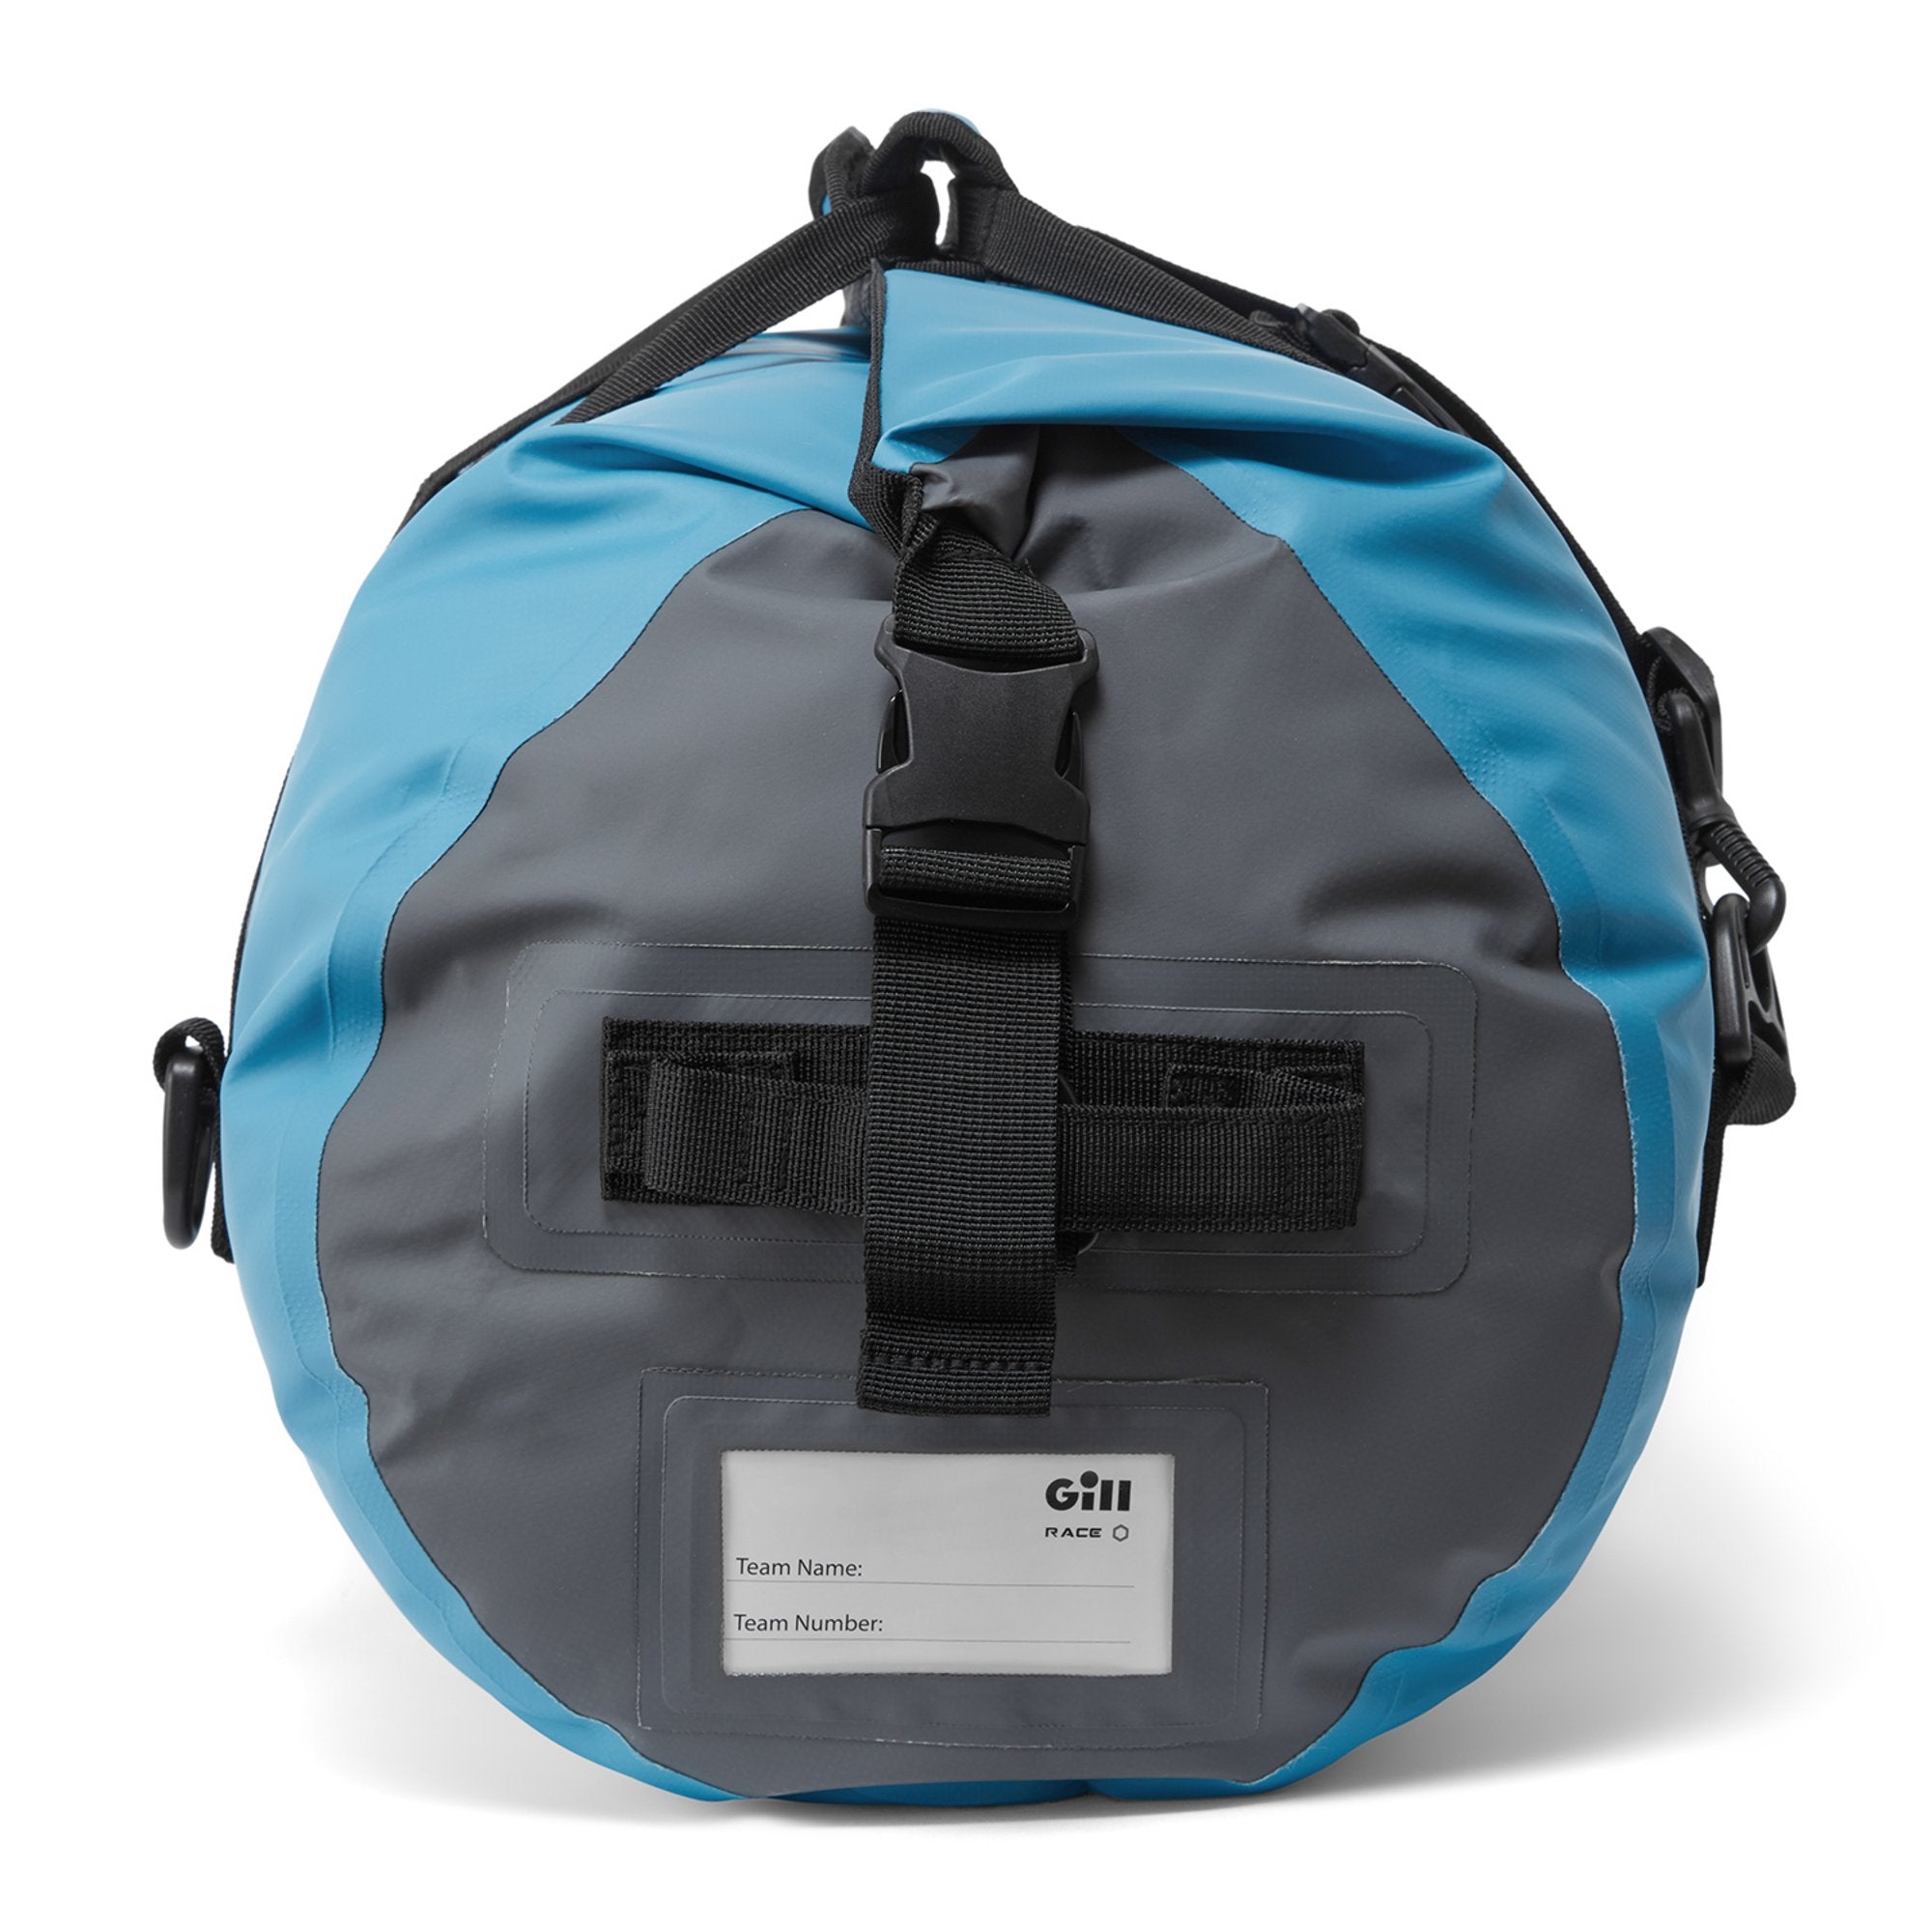 Gill 30L Voyager Duffel Bag - Special Edition